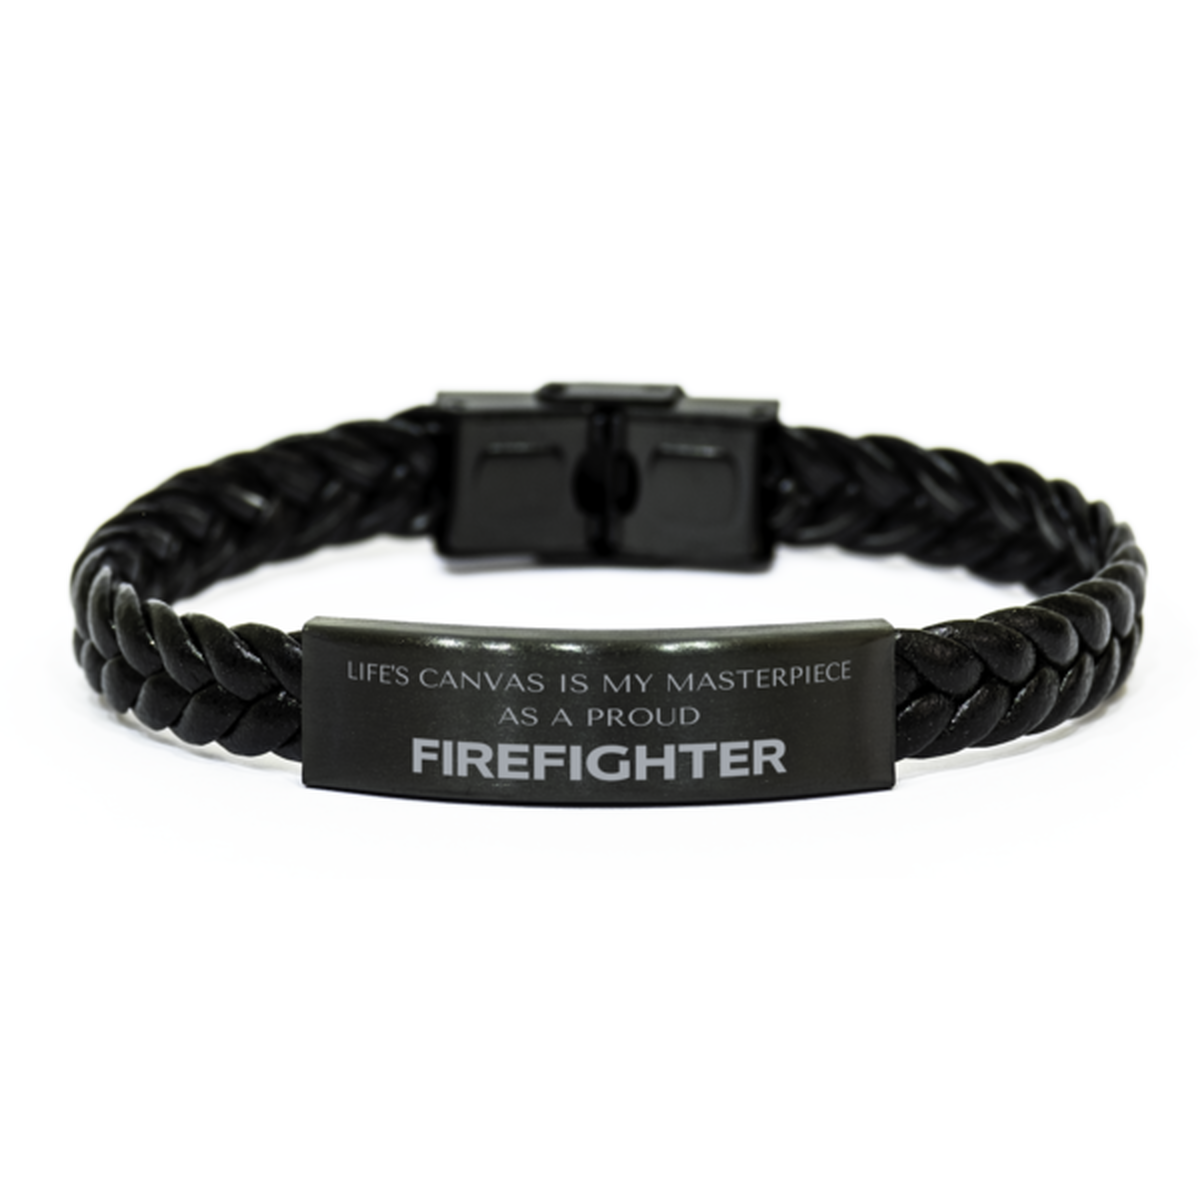 Proud Firefighter Gifts, Life's canvas is my masterpiece, Epic Birthday Christmas Unique Braided Leather Bracelet For Firefighter, Coworkers, Men, Women, Friends